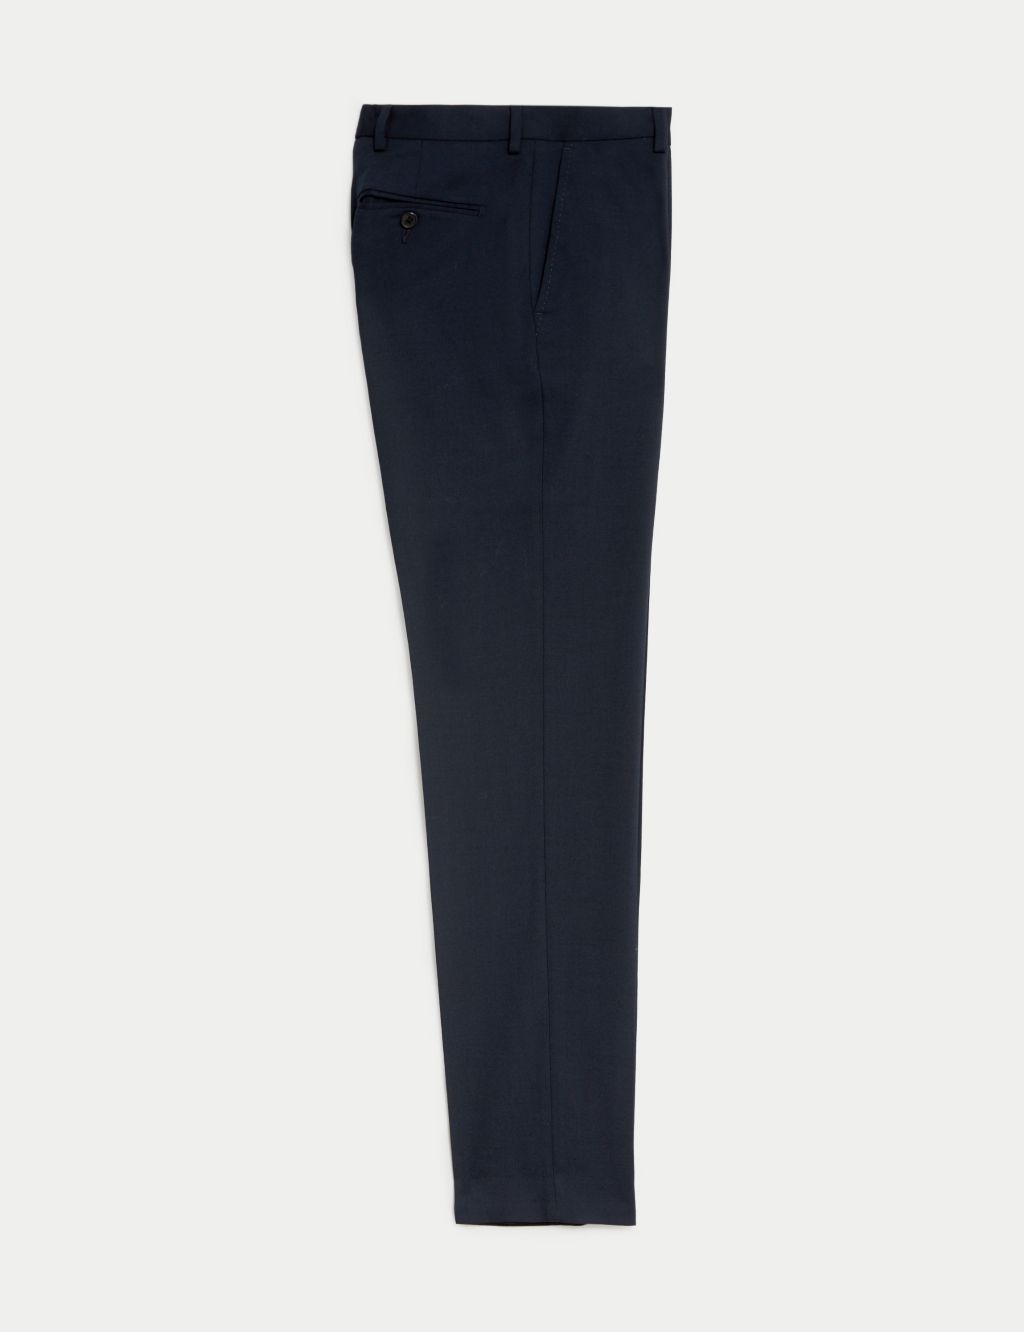 Wool Blend Flat Front Stretch Trousers image 2